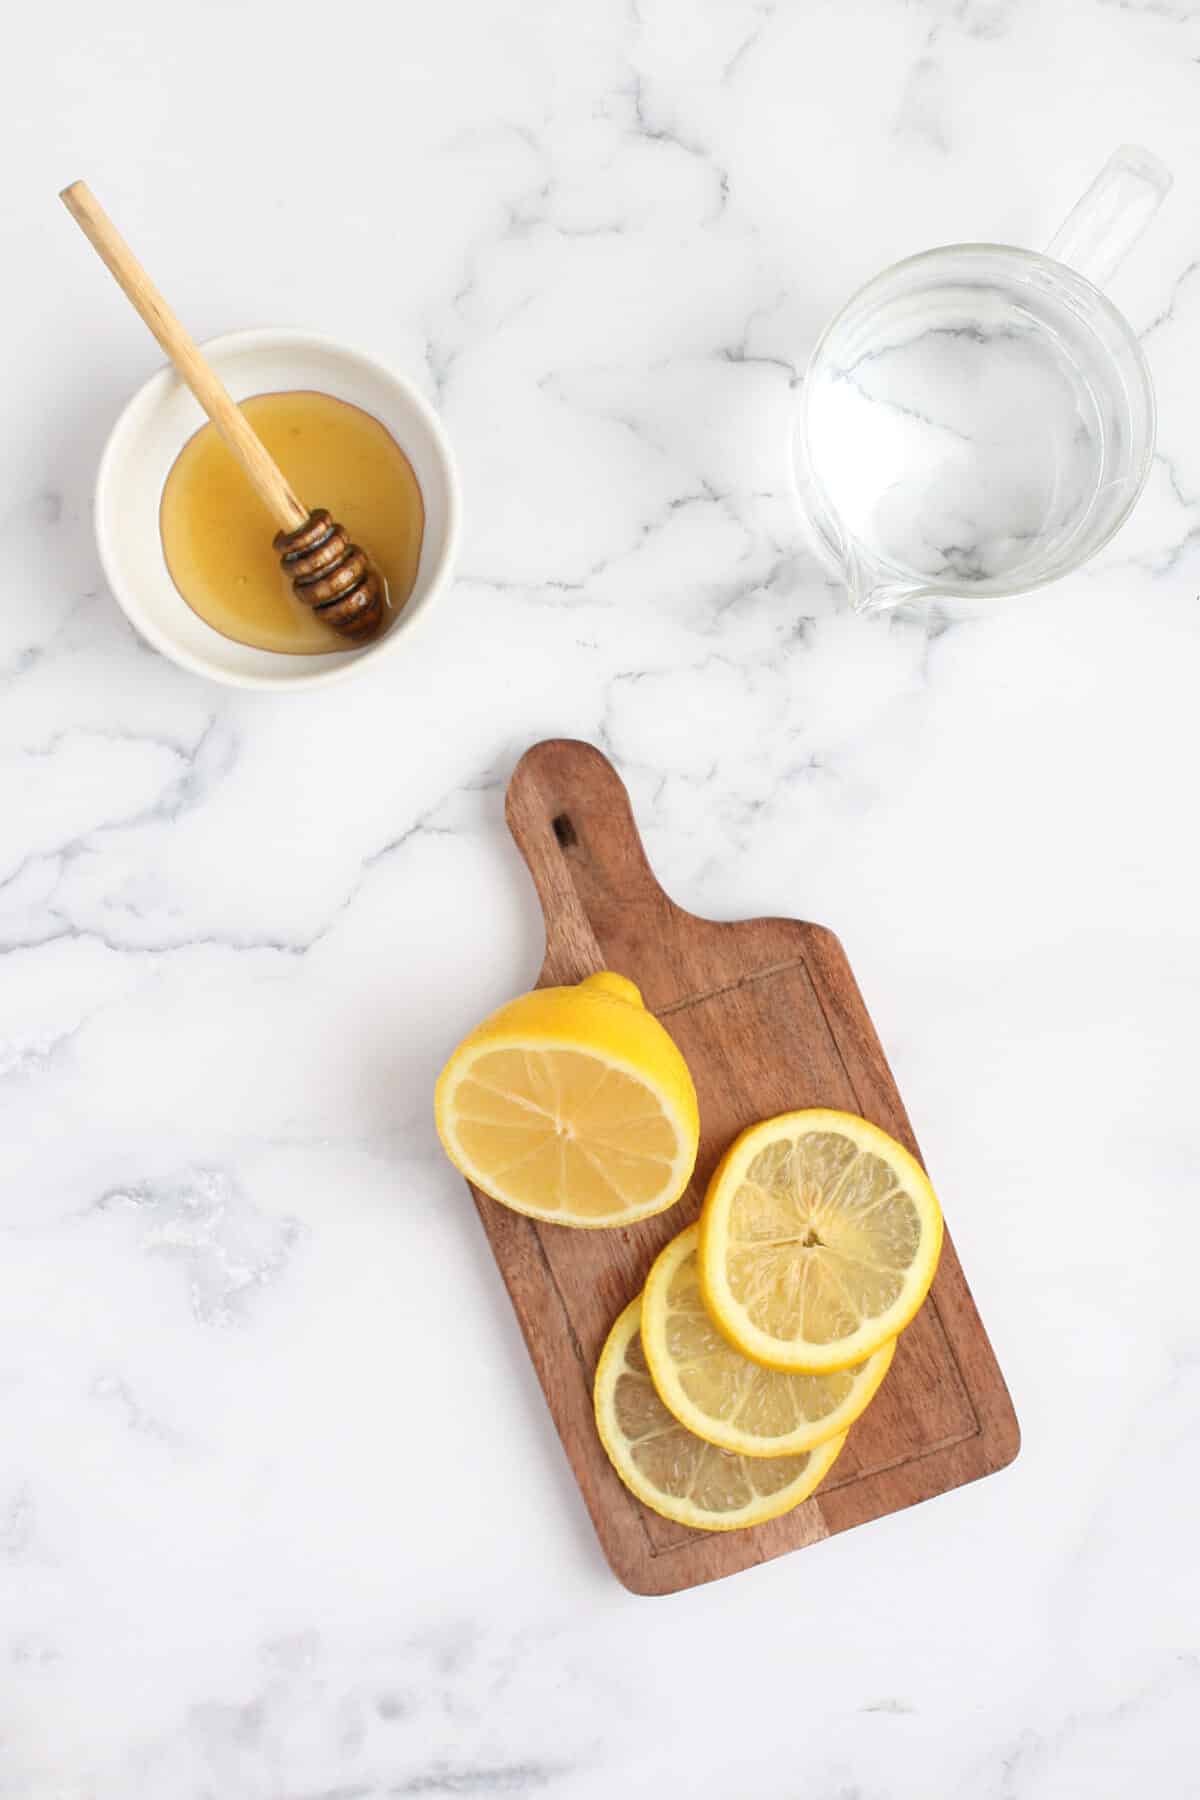 ingredients for honey lemon cold remedy